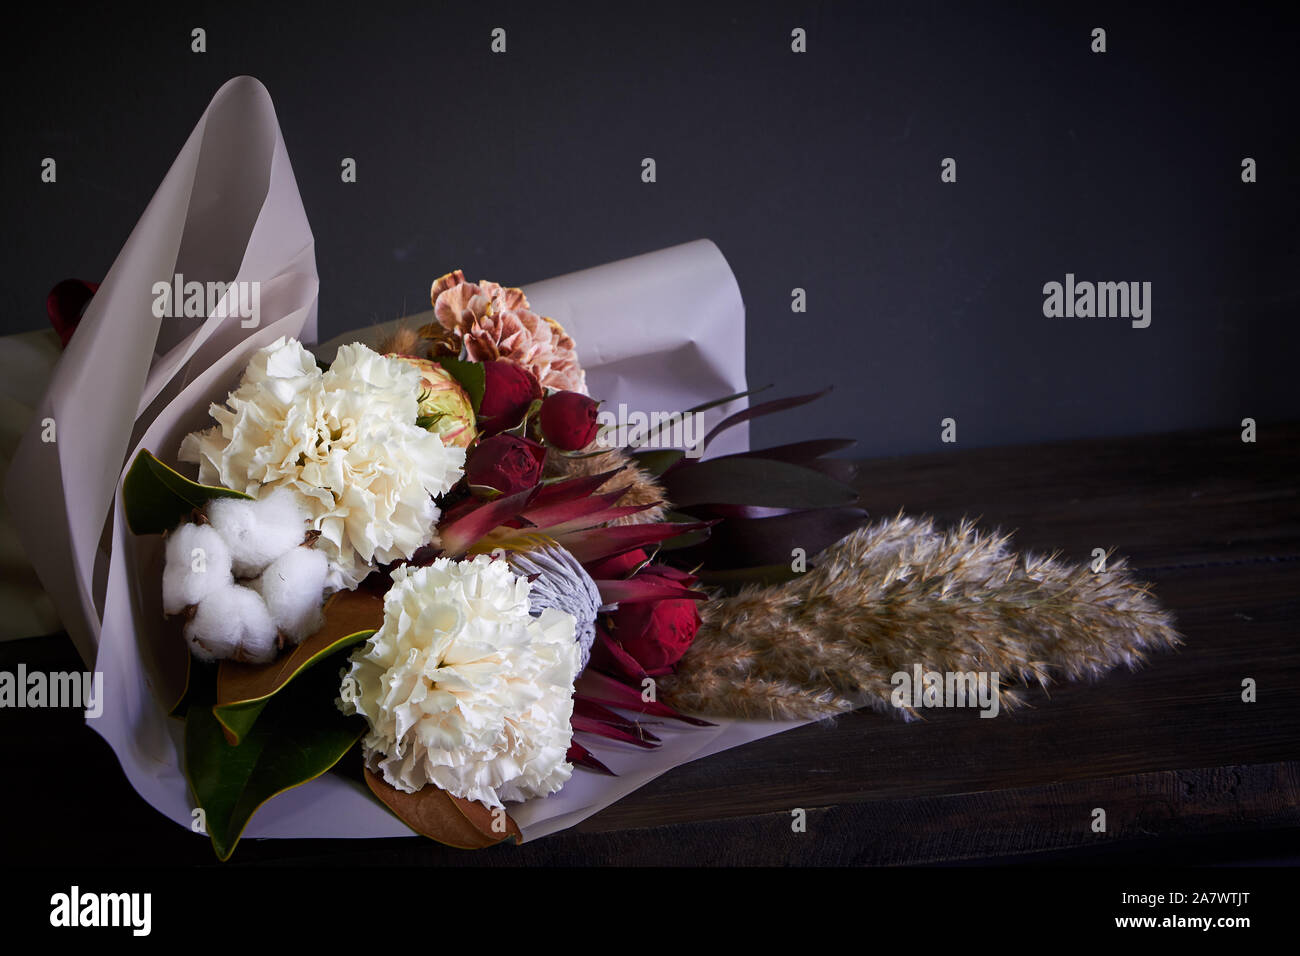 Close-up bouquet decorated in vintage style on a dark background, selective focus Stock Photo